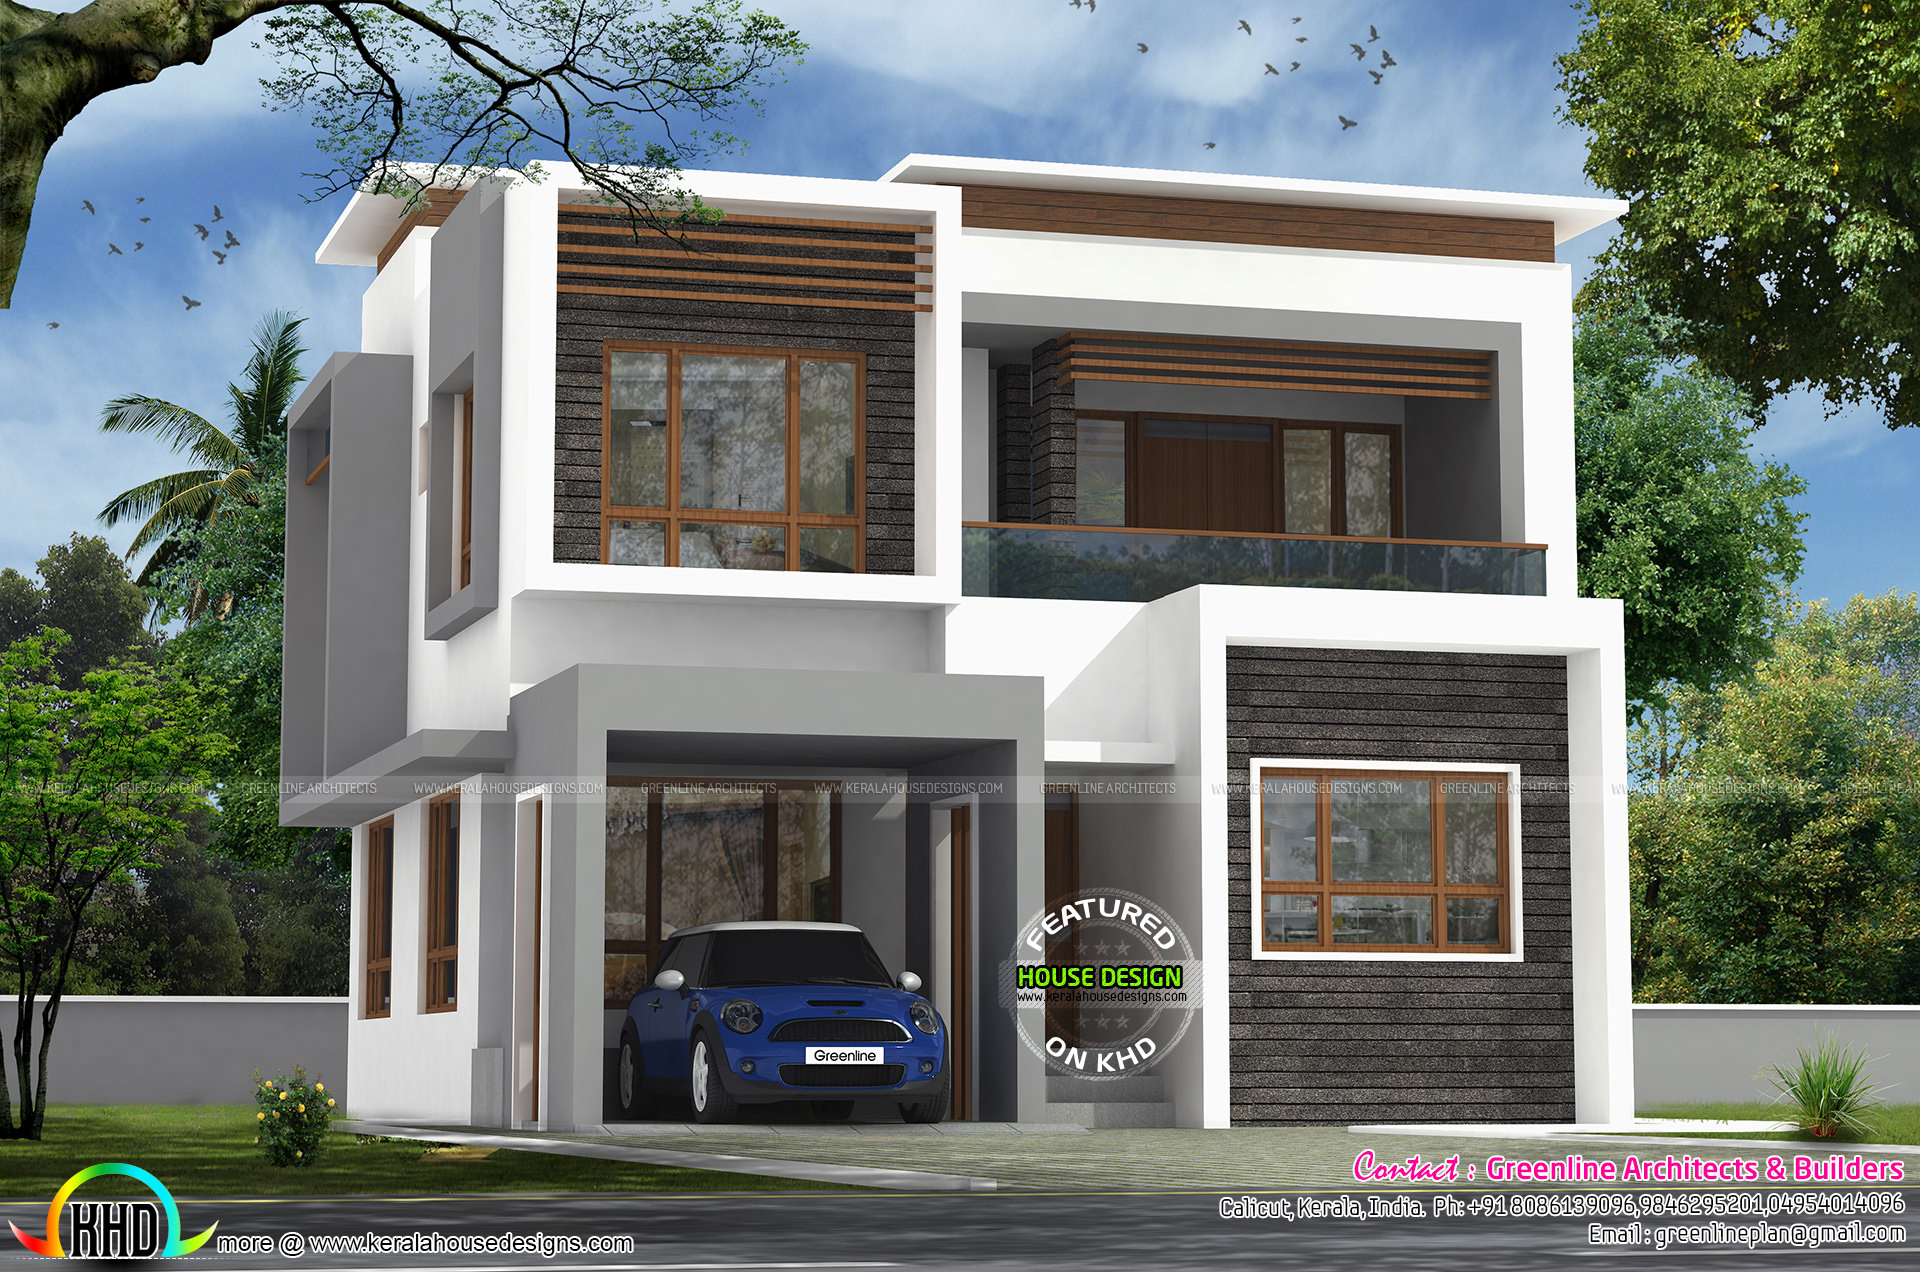  3  bedroom  40x50 modern  house  architecture Kerala home  